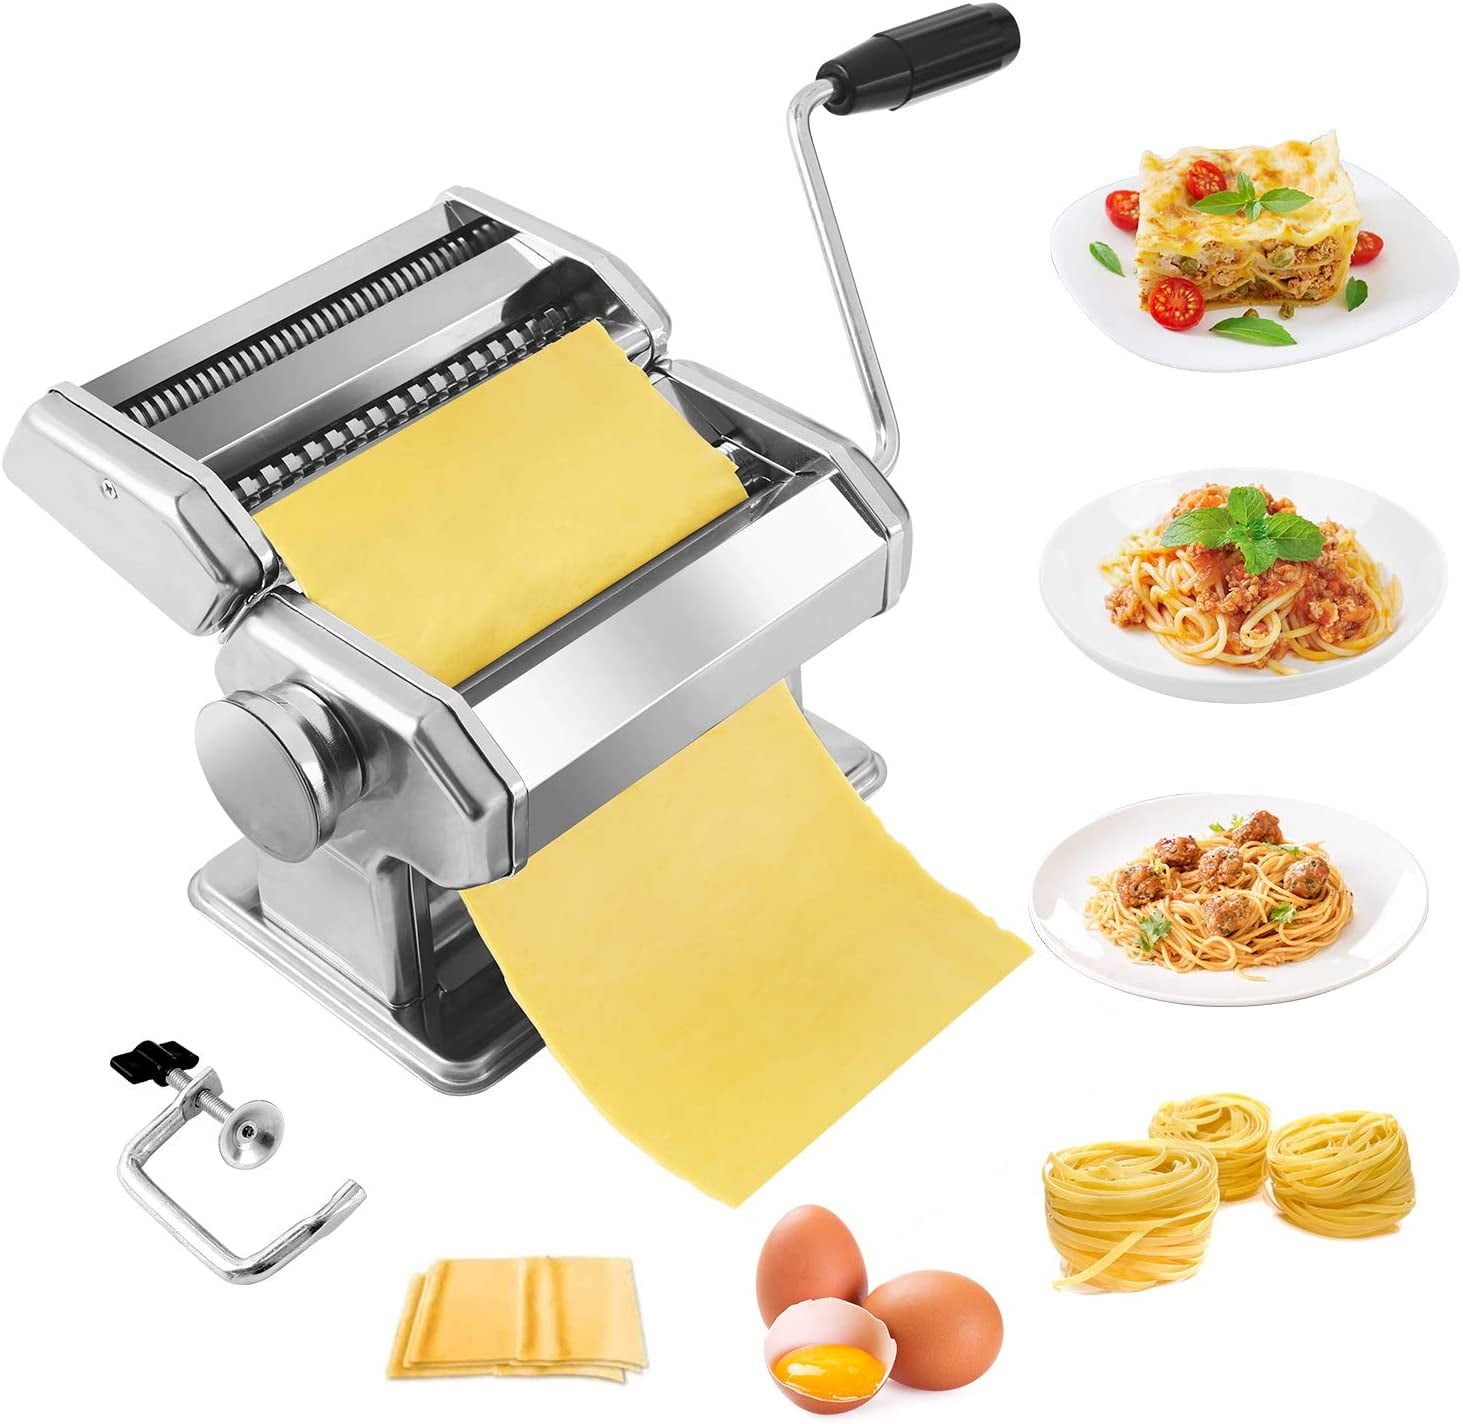 Pasta Maker,Stainless Steel Manual Pasta Maker Machine With 8 Adjustable Thickness Settings,2 Blades Noodle for Spaghetti, Fettuccini, Lasagna,or Dumpling Skins - Walmart.com